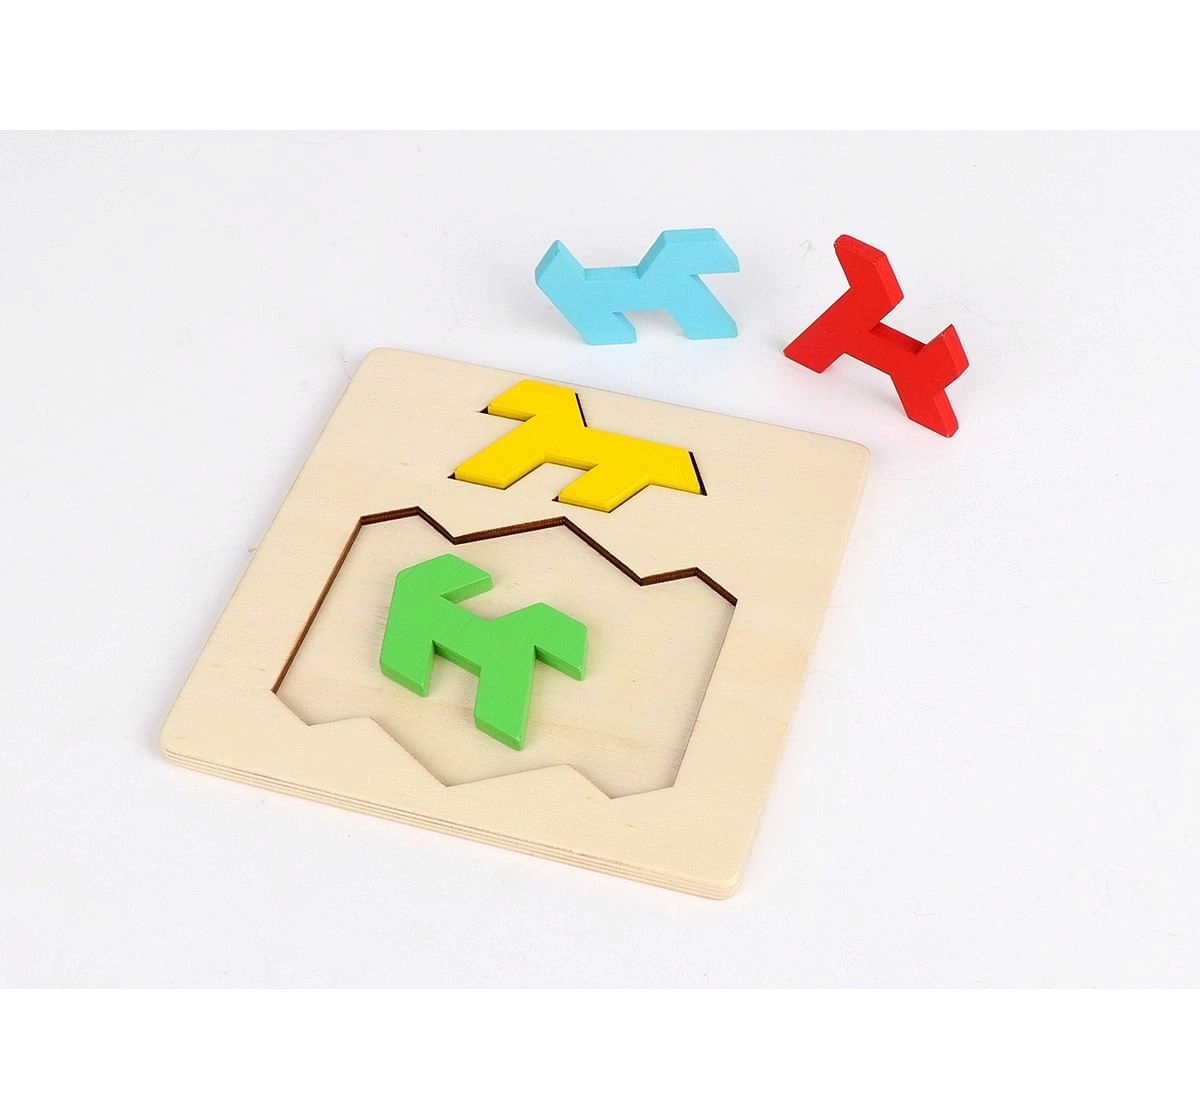 Mi Puzzles Fitting 2 In 1 Games for Kids age 6Y+ 